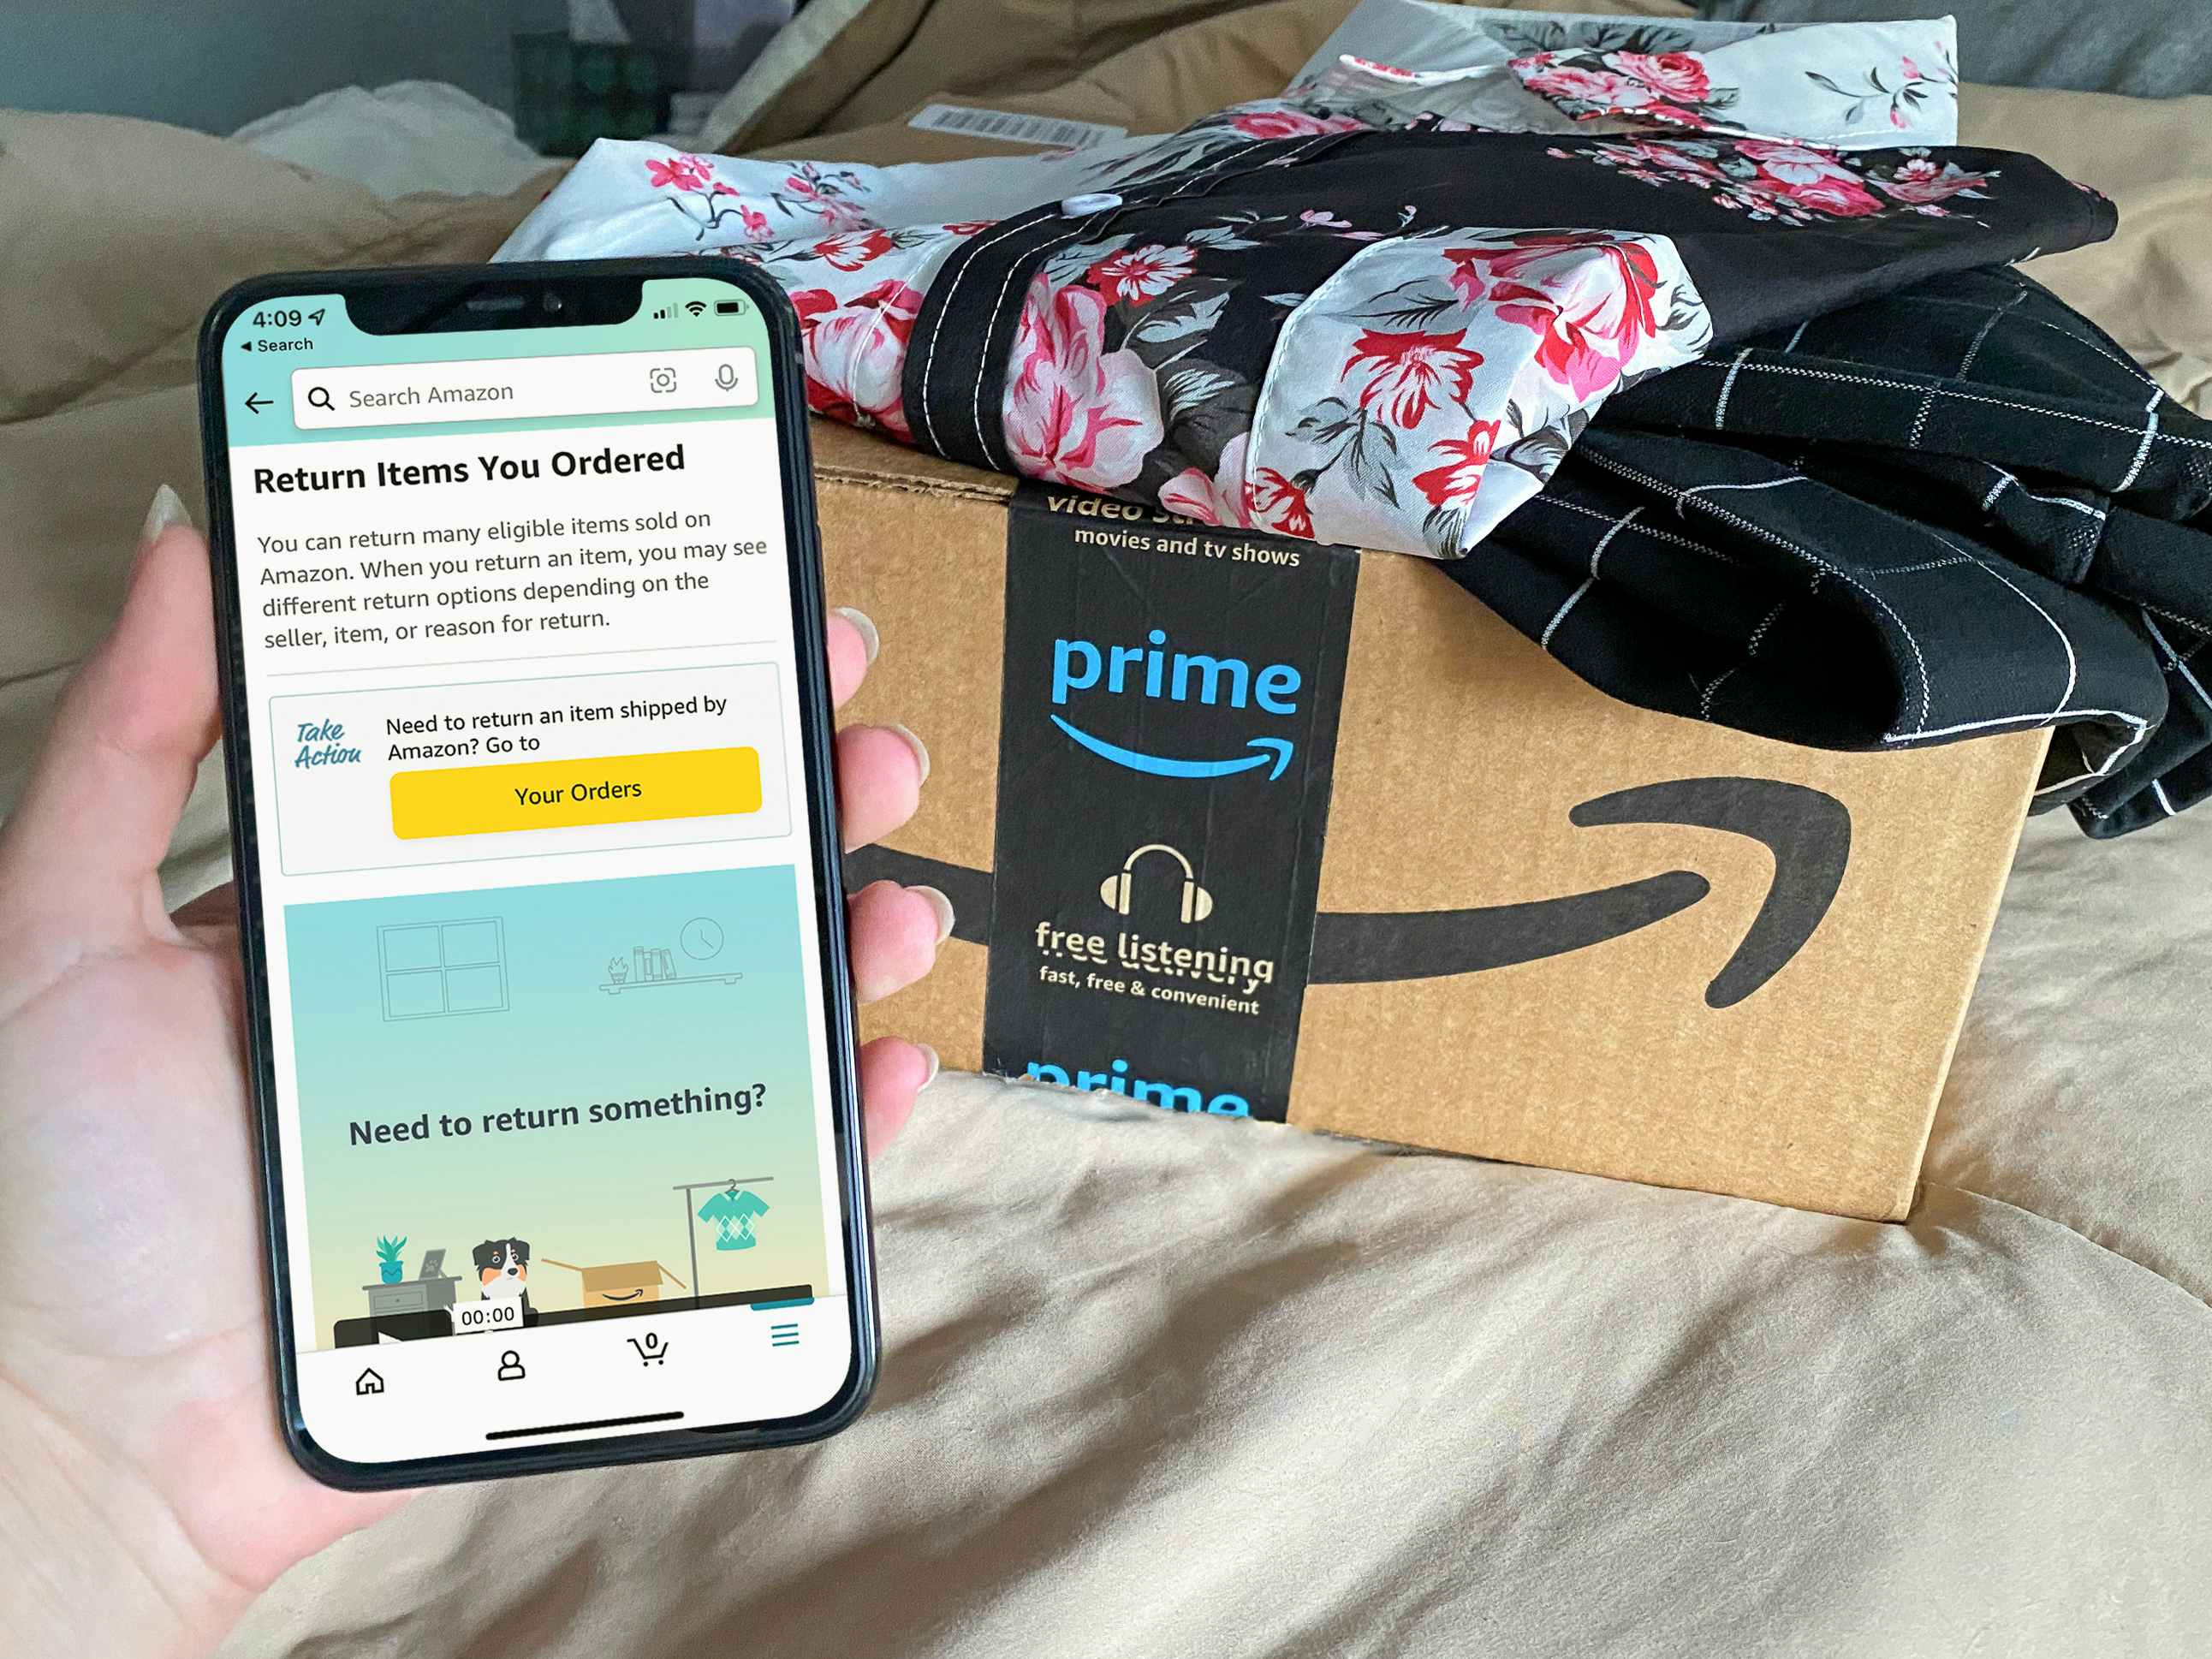 A person's hand holding an iPhone displaying the "Return Items You Ordered" page on the Amazon app next to an Amazon Prime box with cloth...